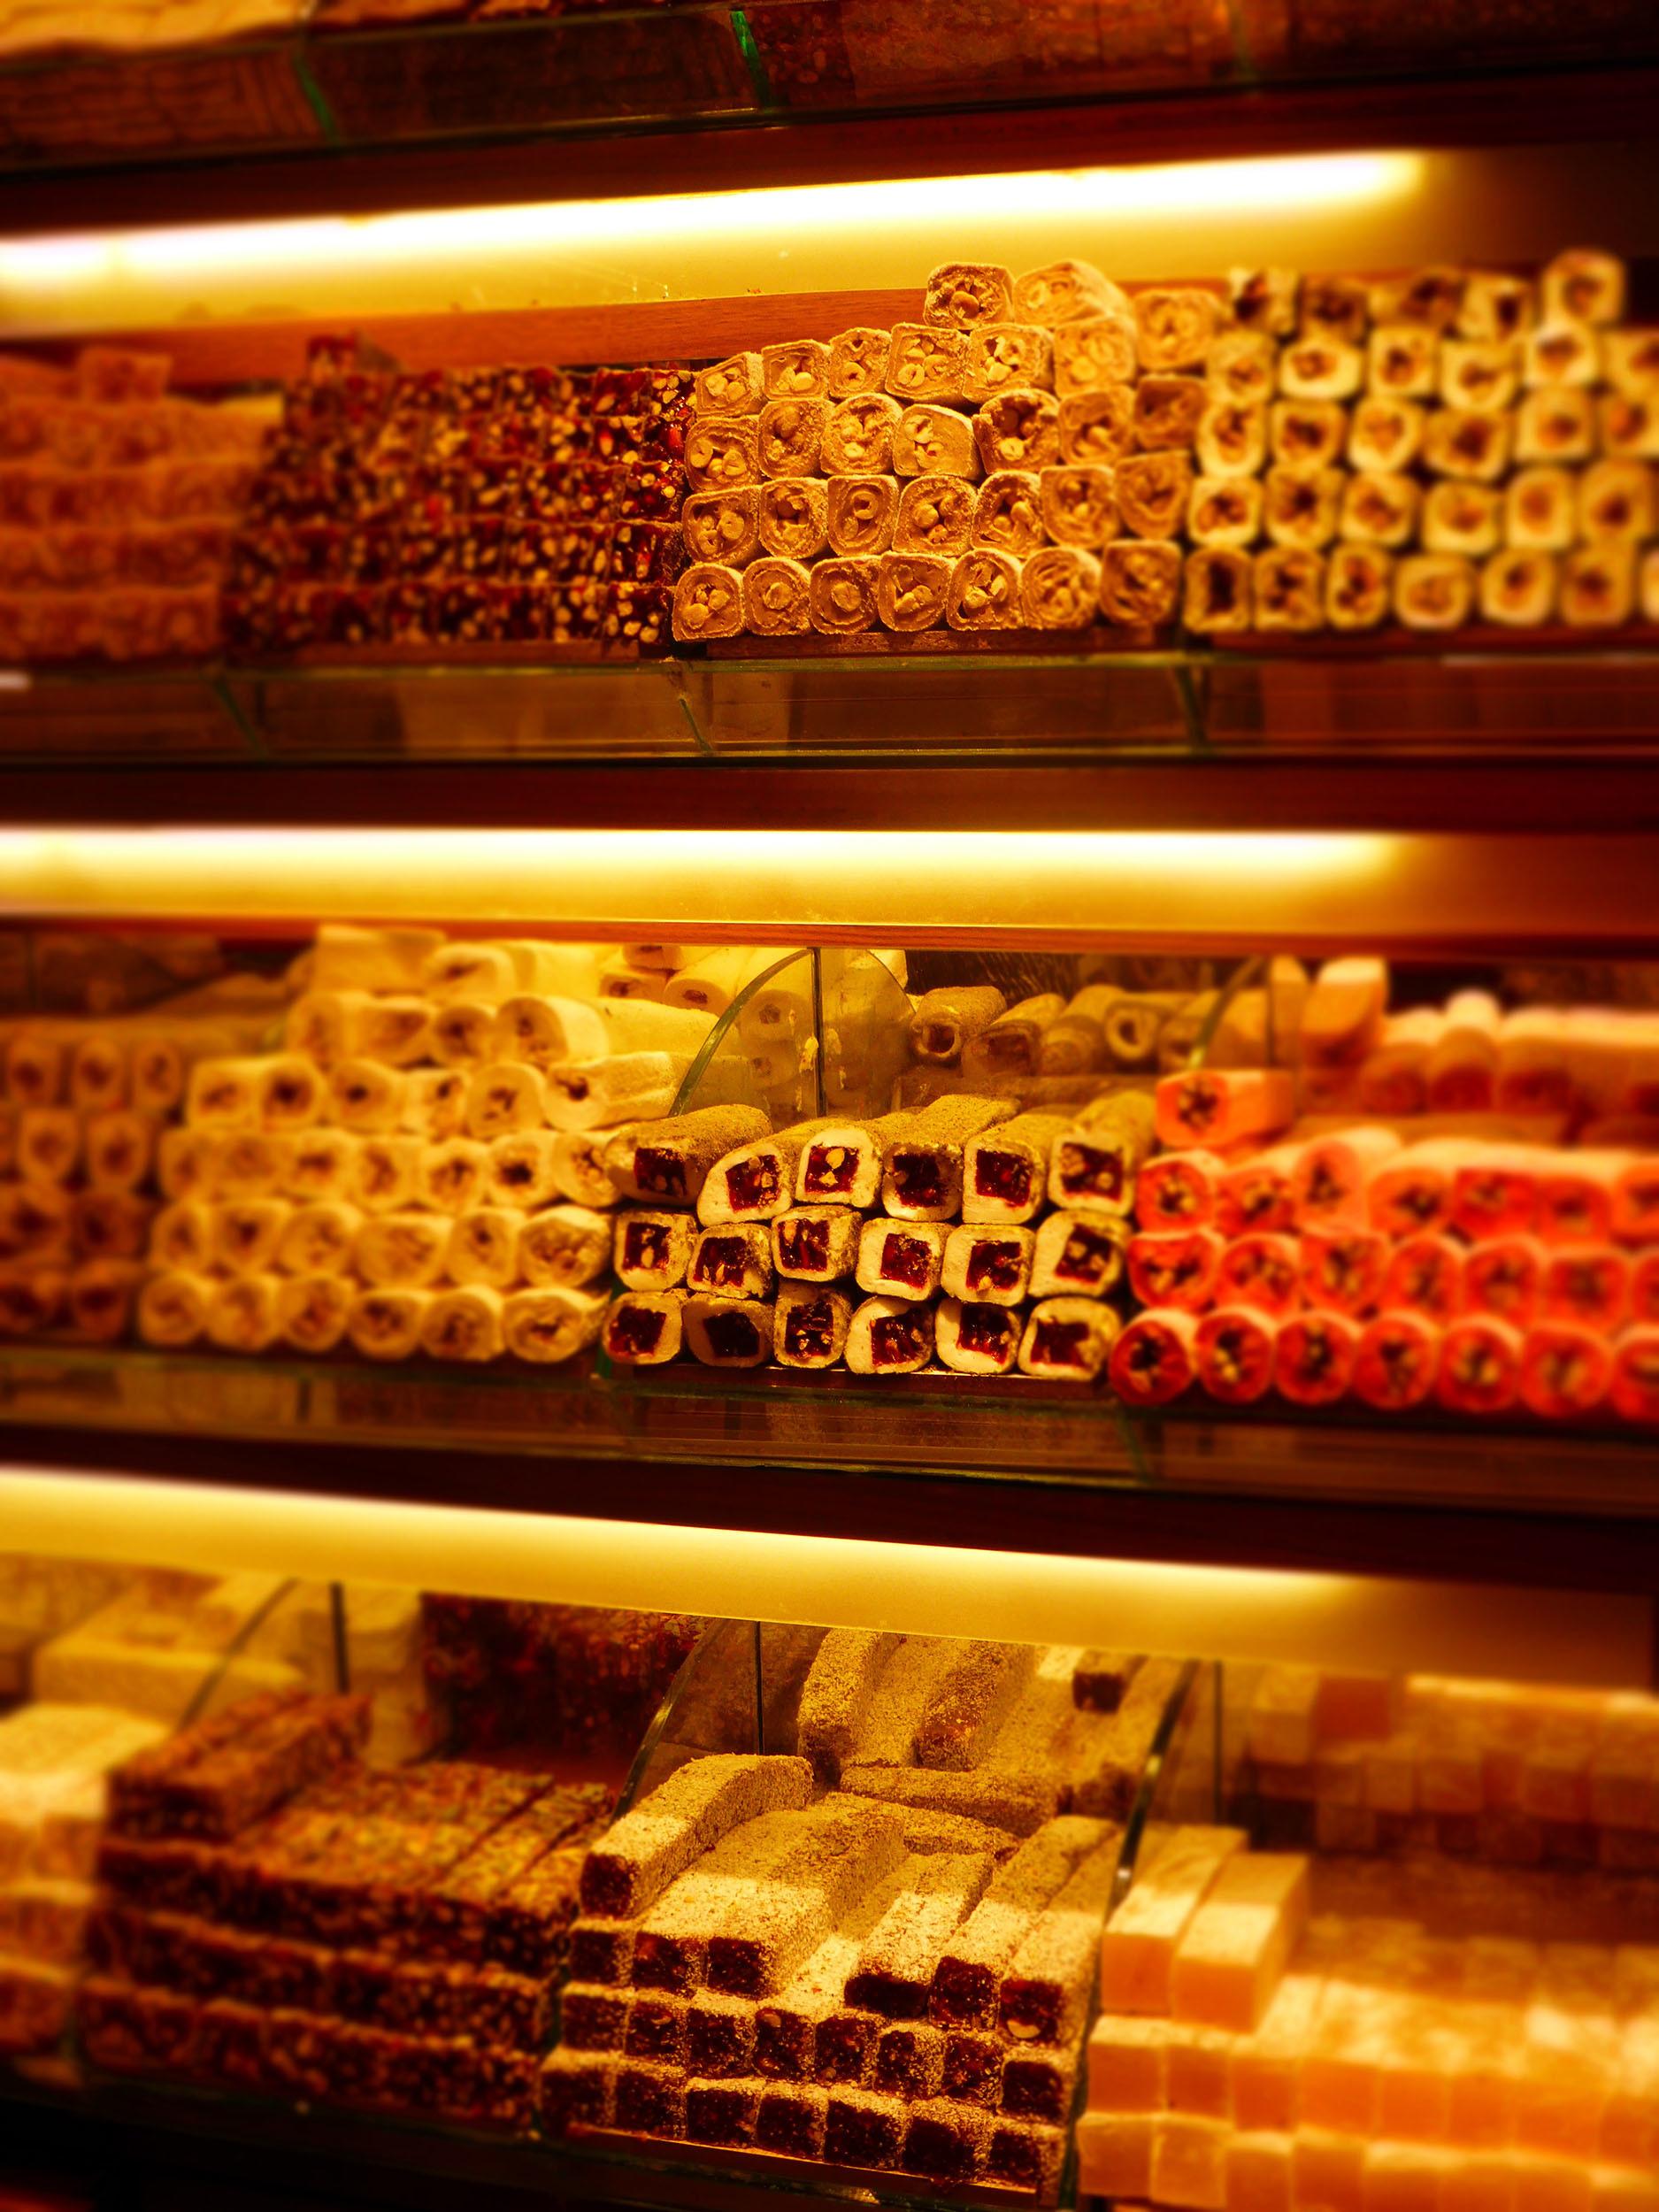 Display of Turkish sweets in a store within Istanbul's Grand Bazaar Turkey